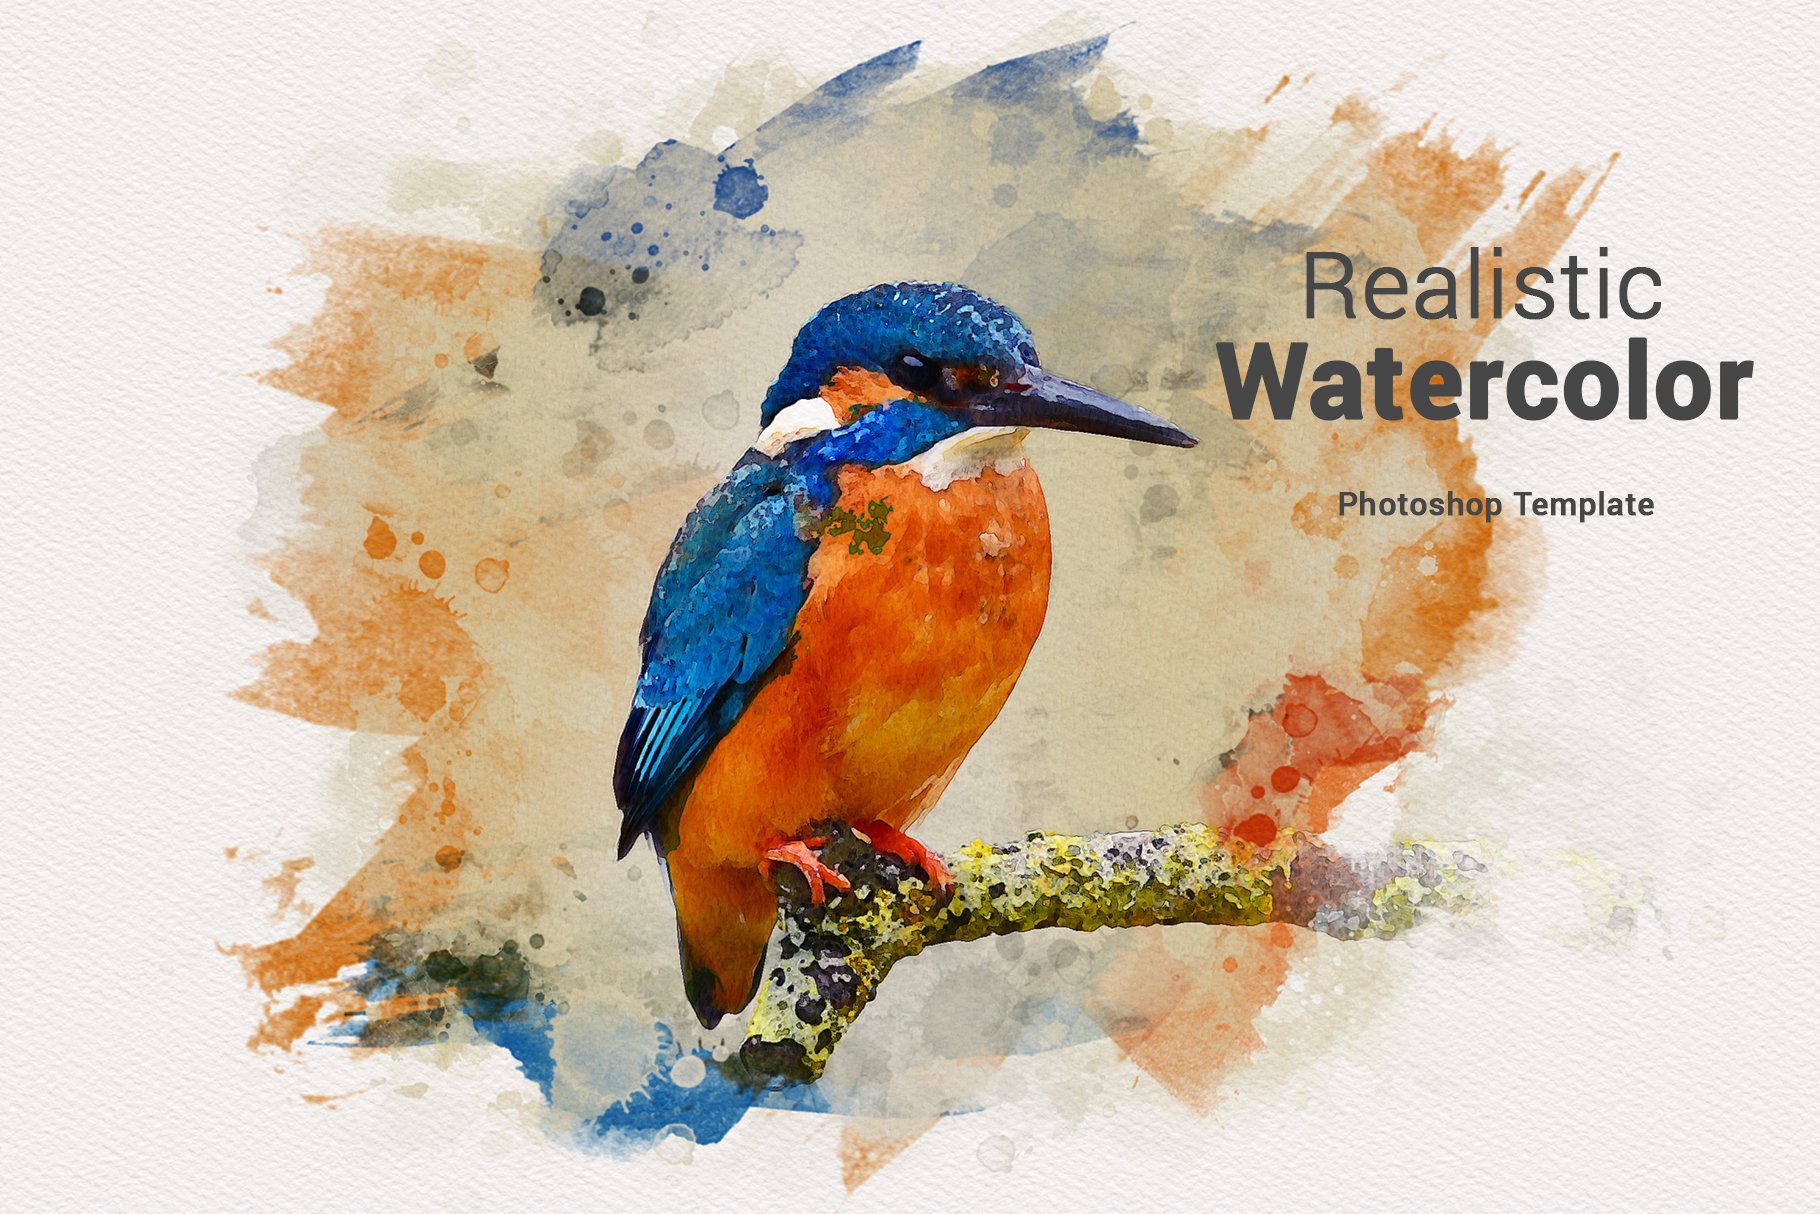 Watercolor Photo Effect Templatecover image.